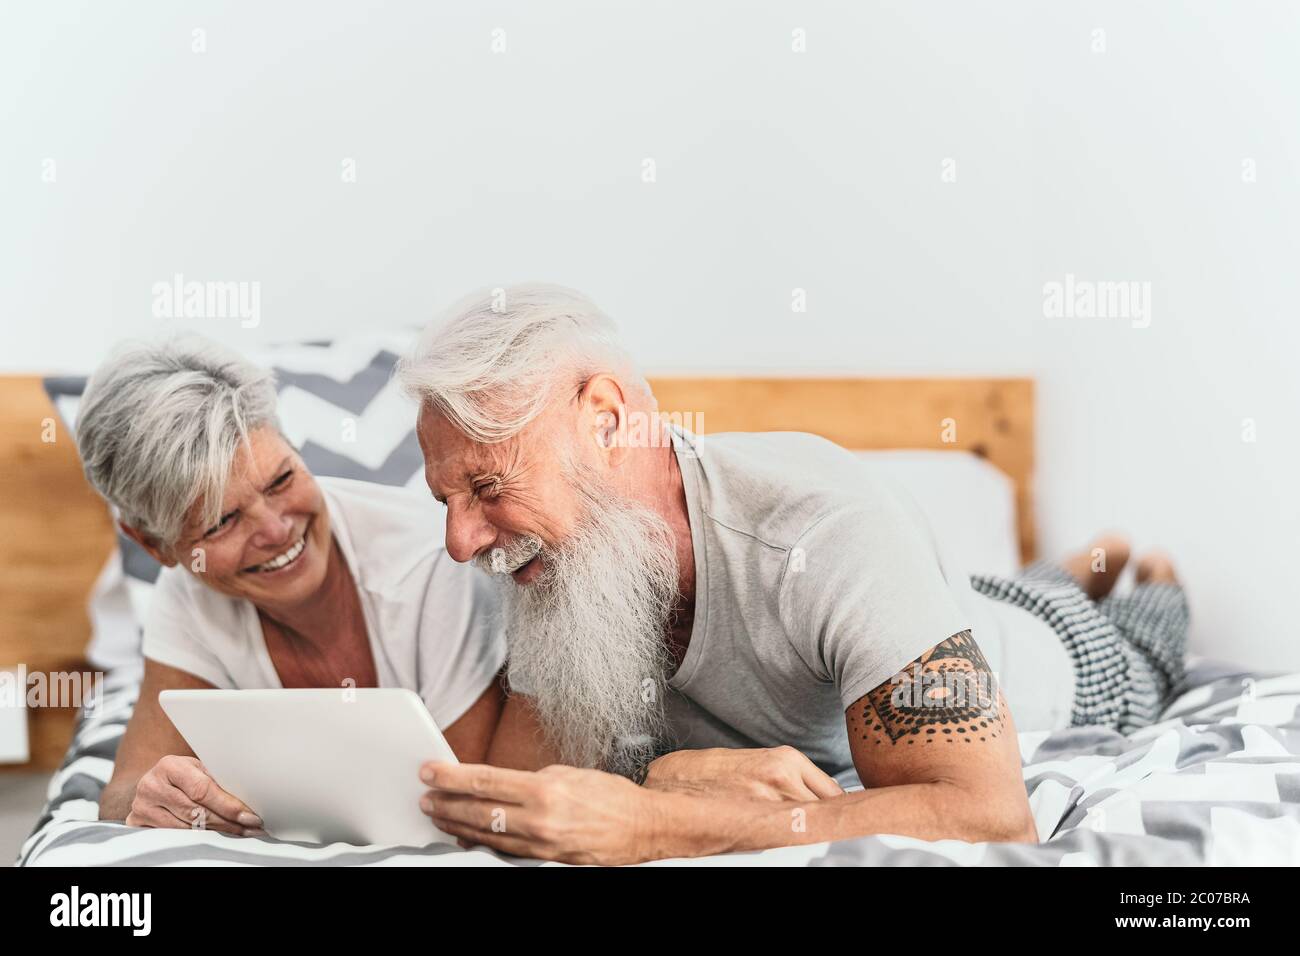 Happy senior couple using digital tablet in bed - Mature people having funny bed time together Stock Photo